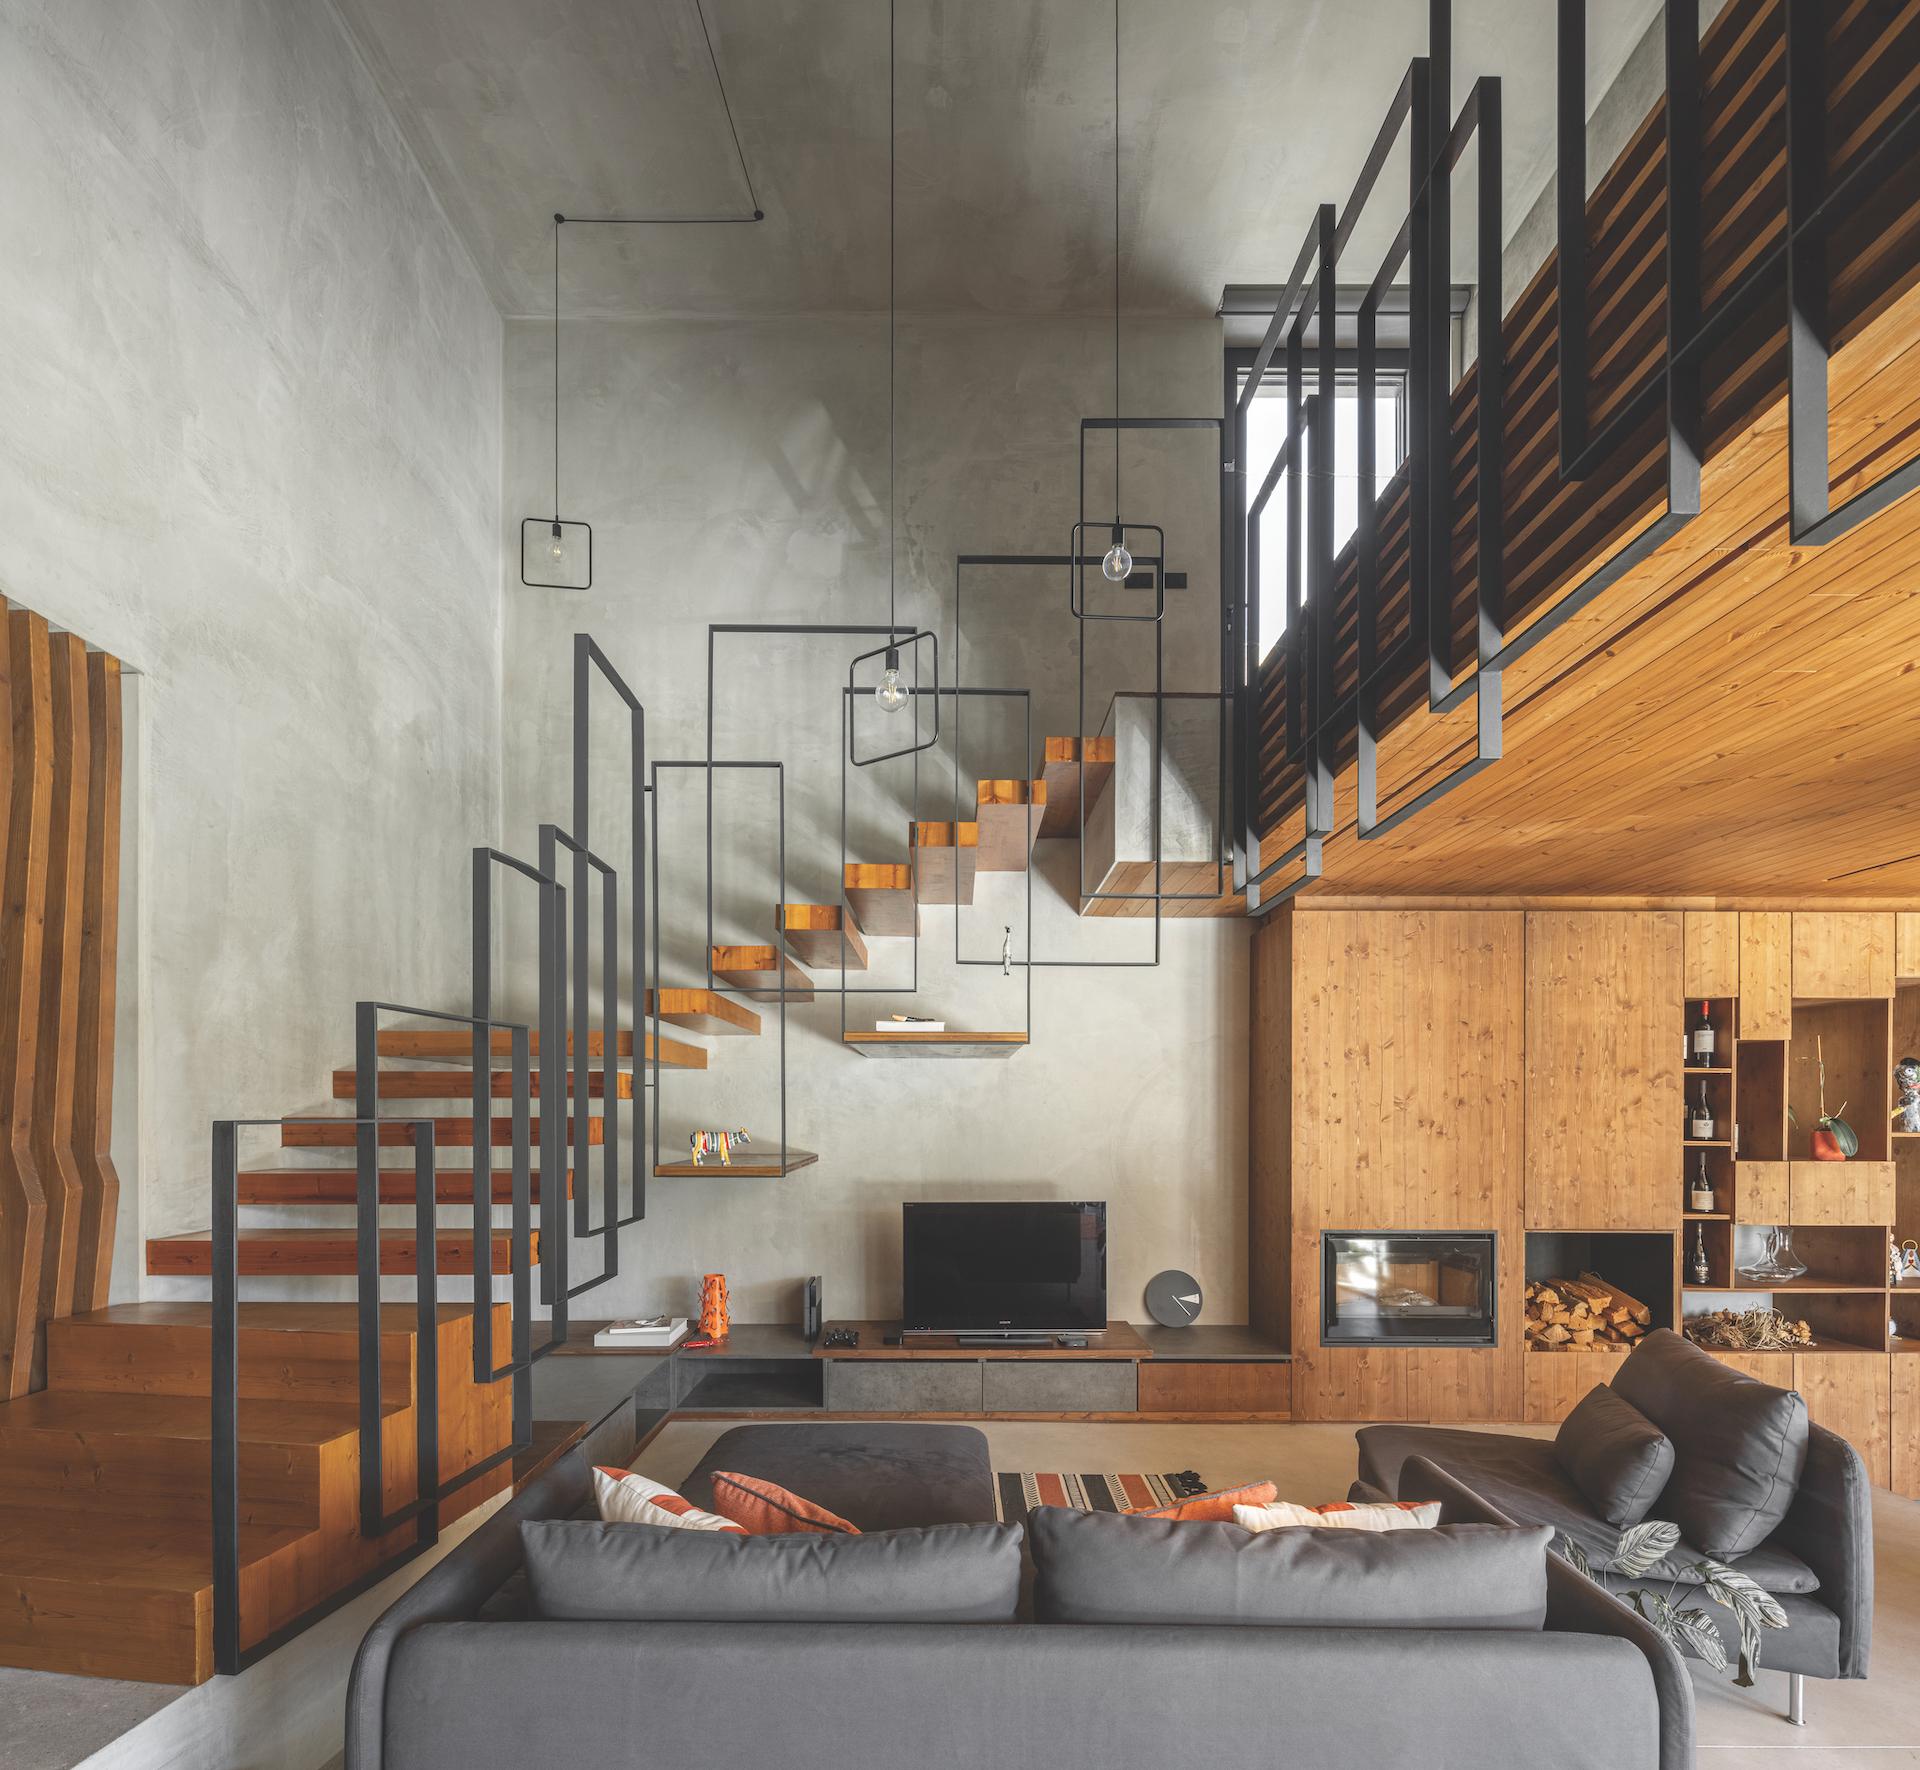 This Industrial-Chic Bi-Generational Beauty in Portugal is All About Balance